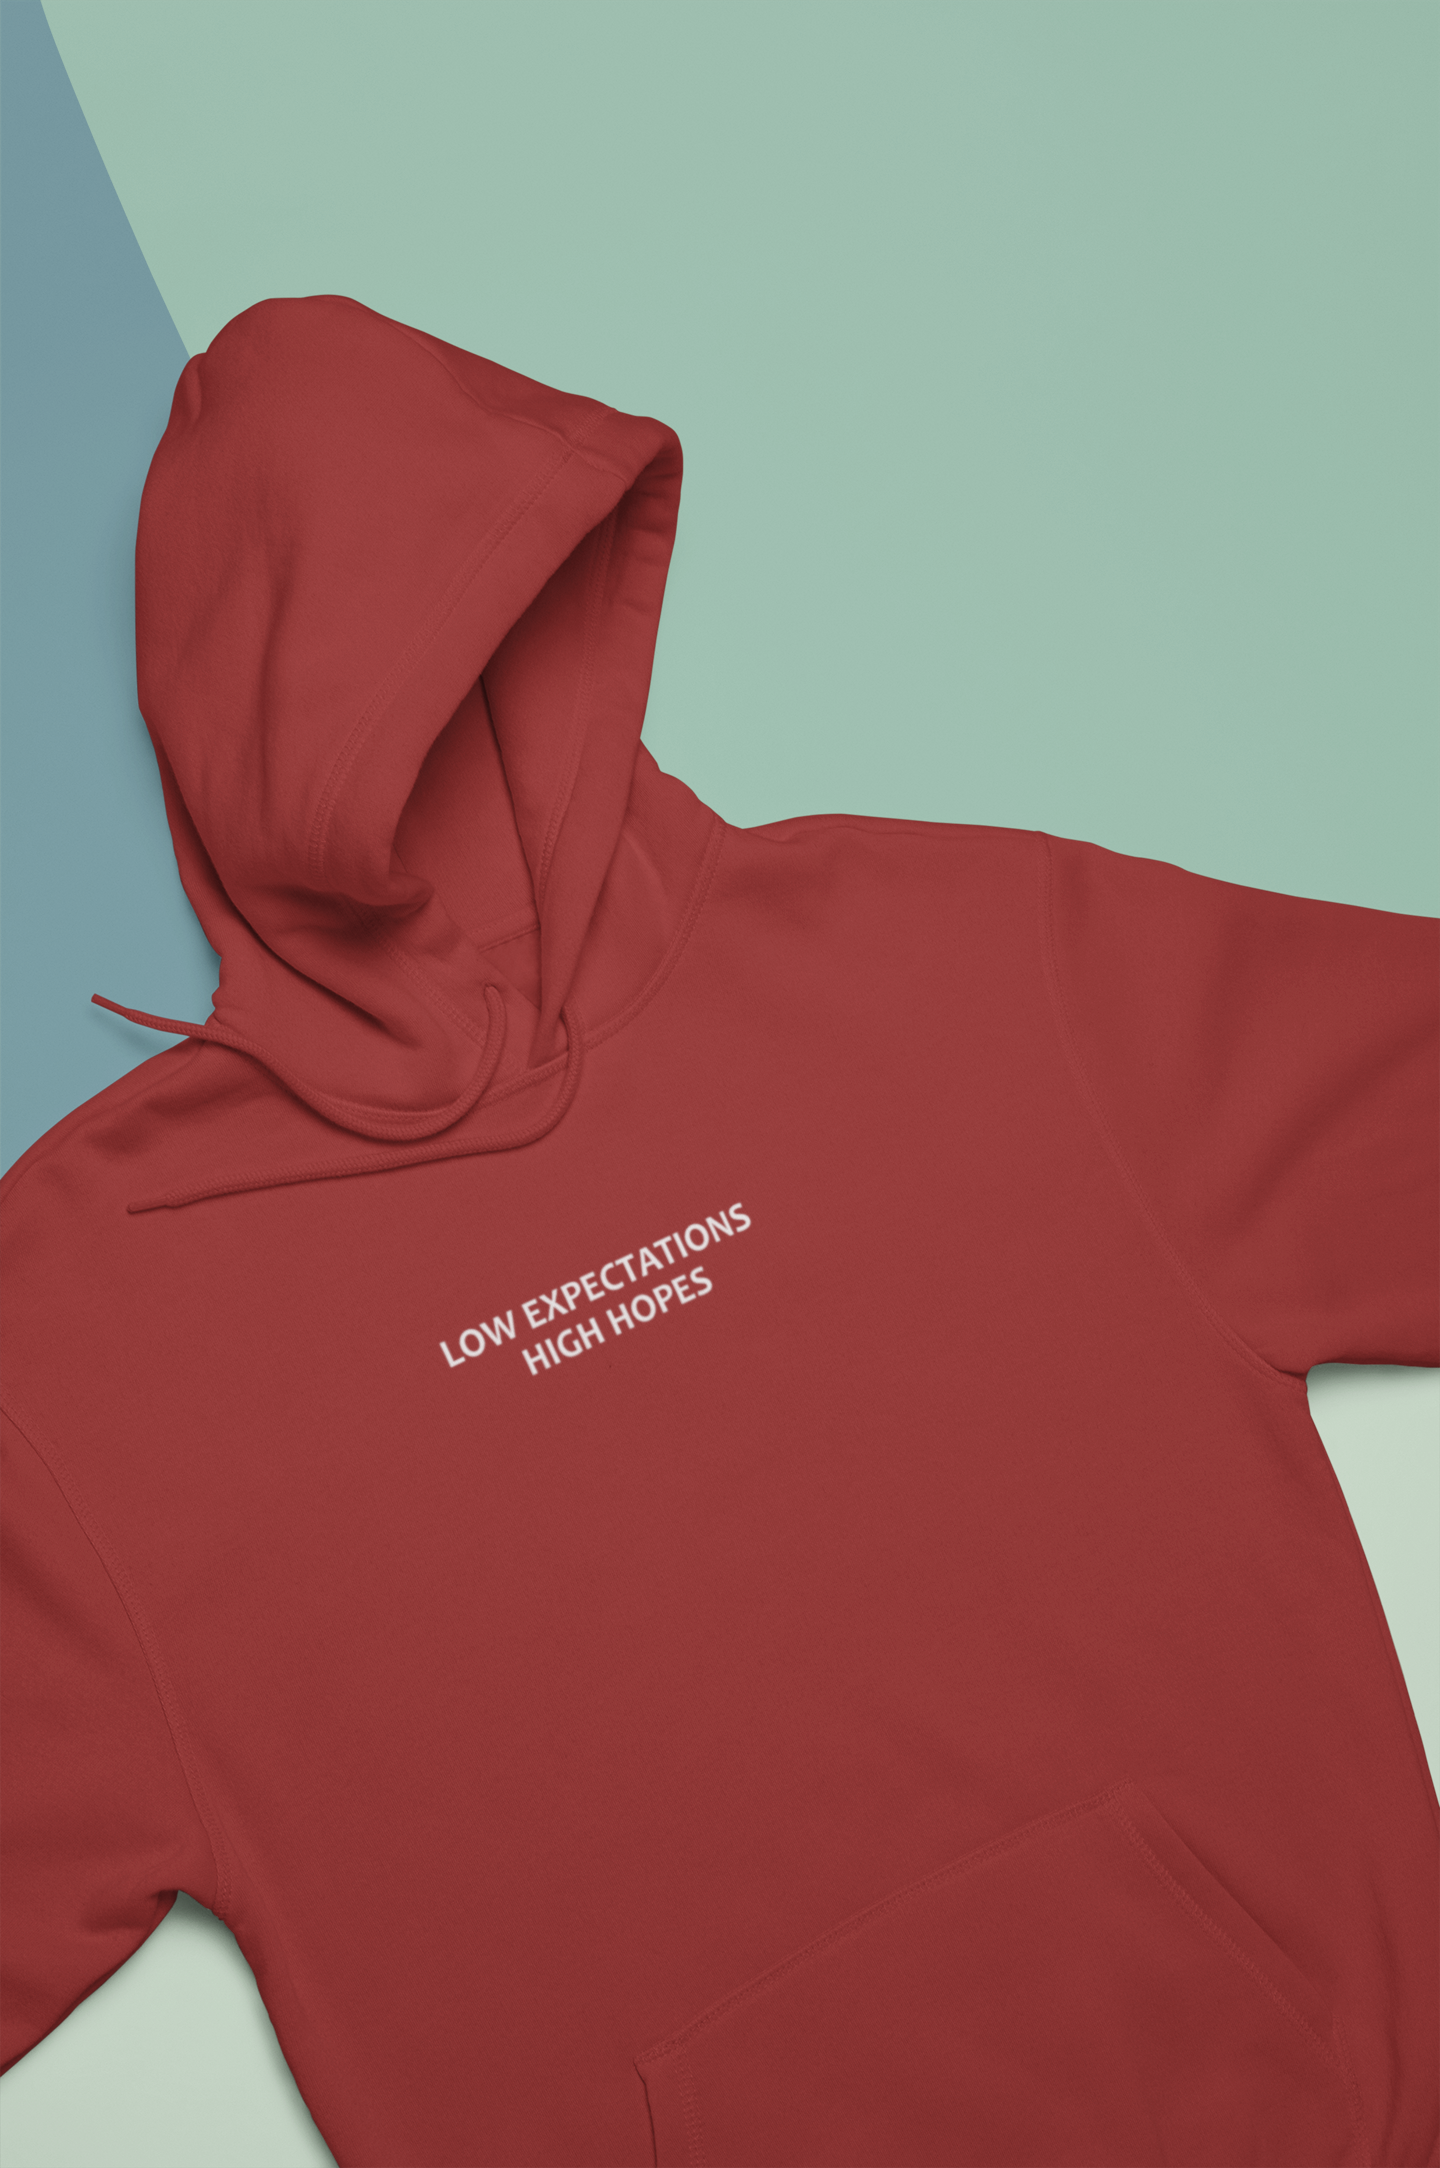 Low Expectations High Hopes Quotes Hoodies for Women-FunkyTeesClub